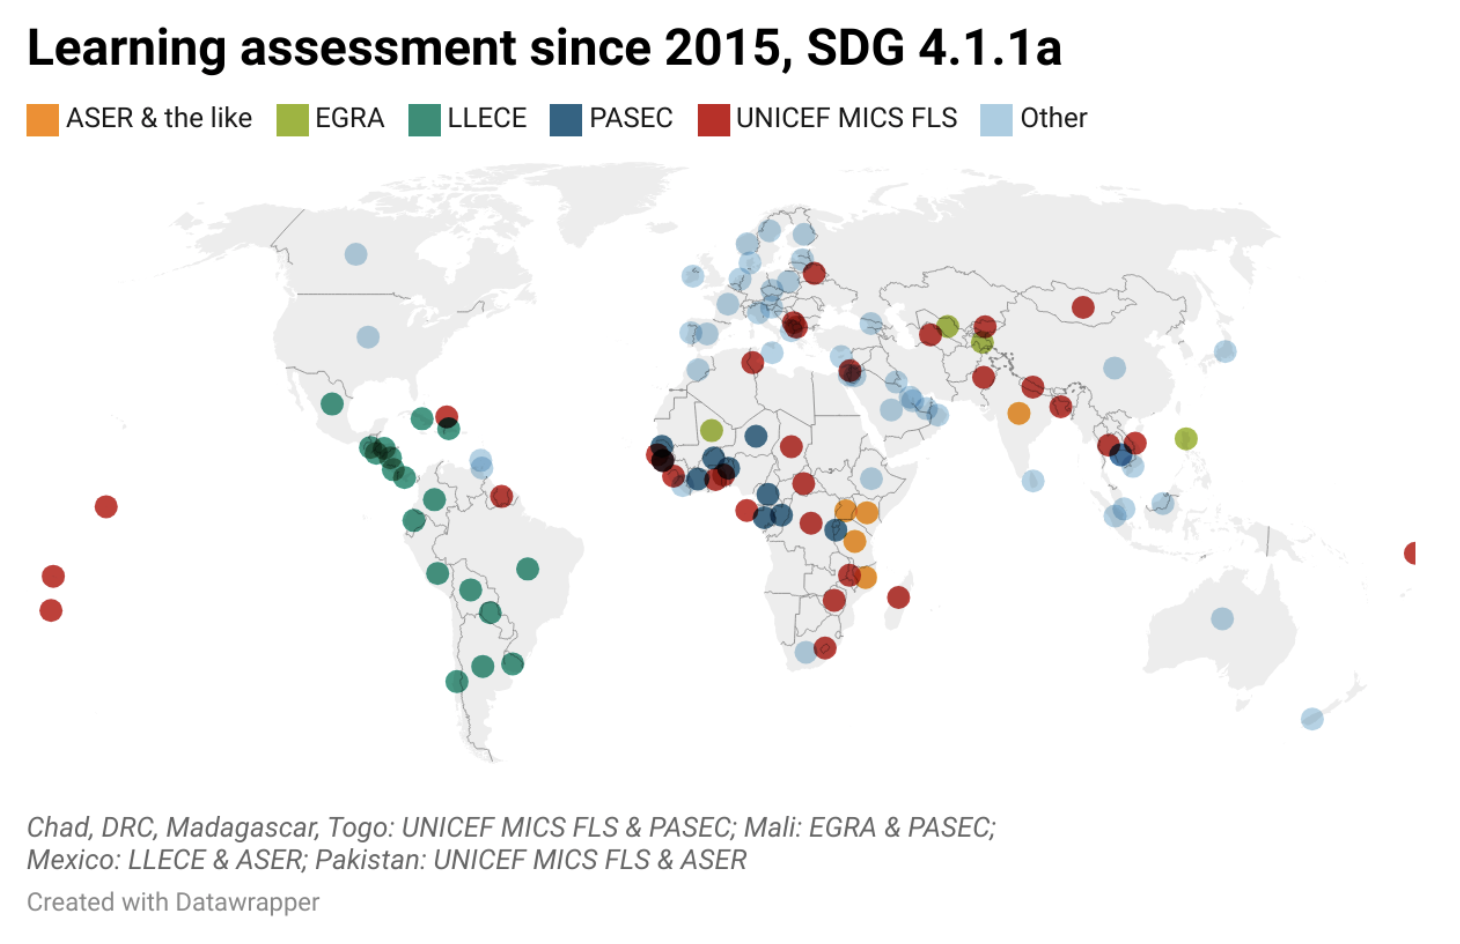 The map shows which countries have conducted various kinds of learning assessments since the launch of the SDGs in 2015